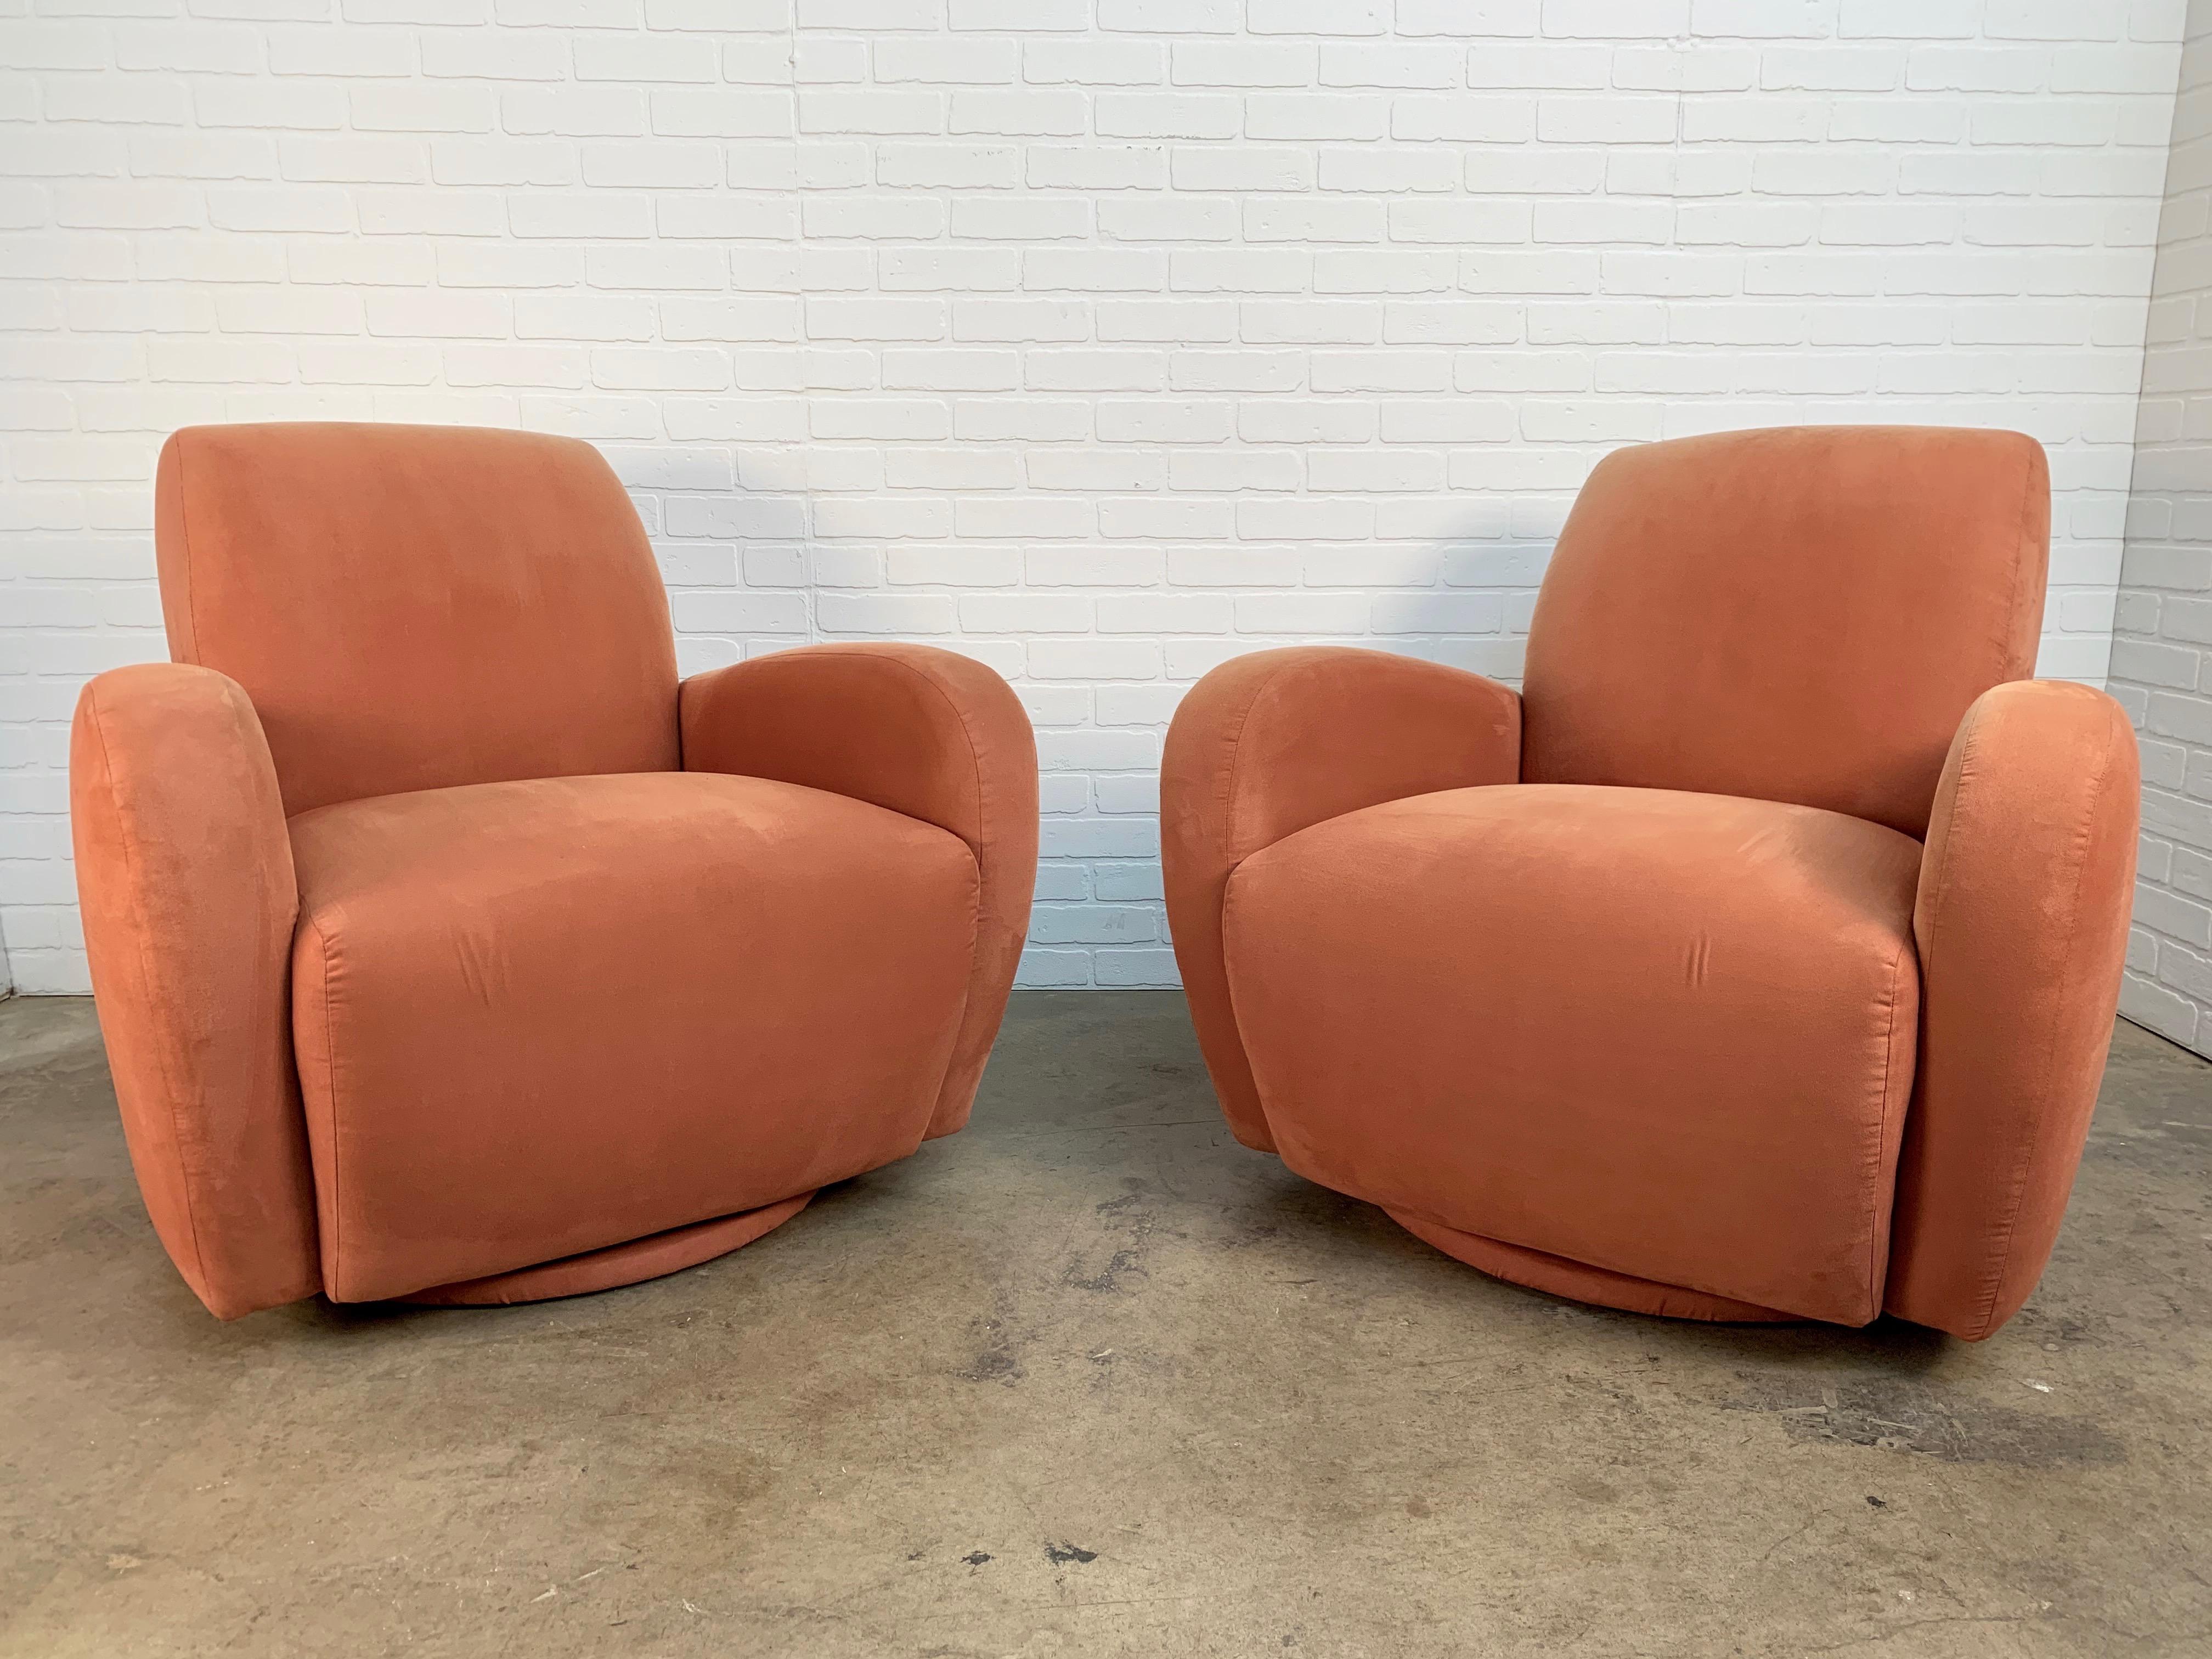 A pair of 1980s Art Deco lounge chairs in coral microfiber. In the style of Kagan or Donghia These chairs need new upholstery. Very faded on one side.